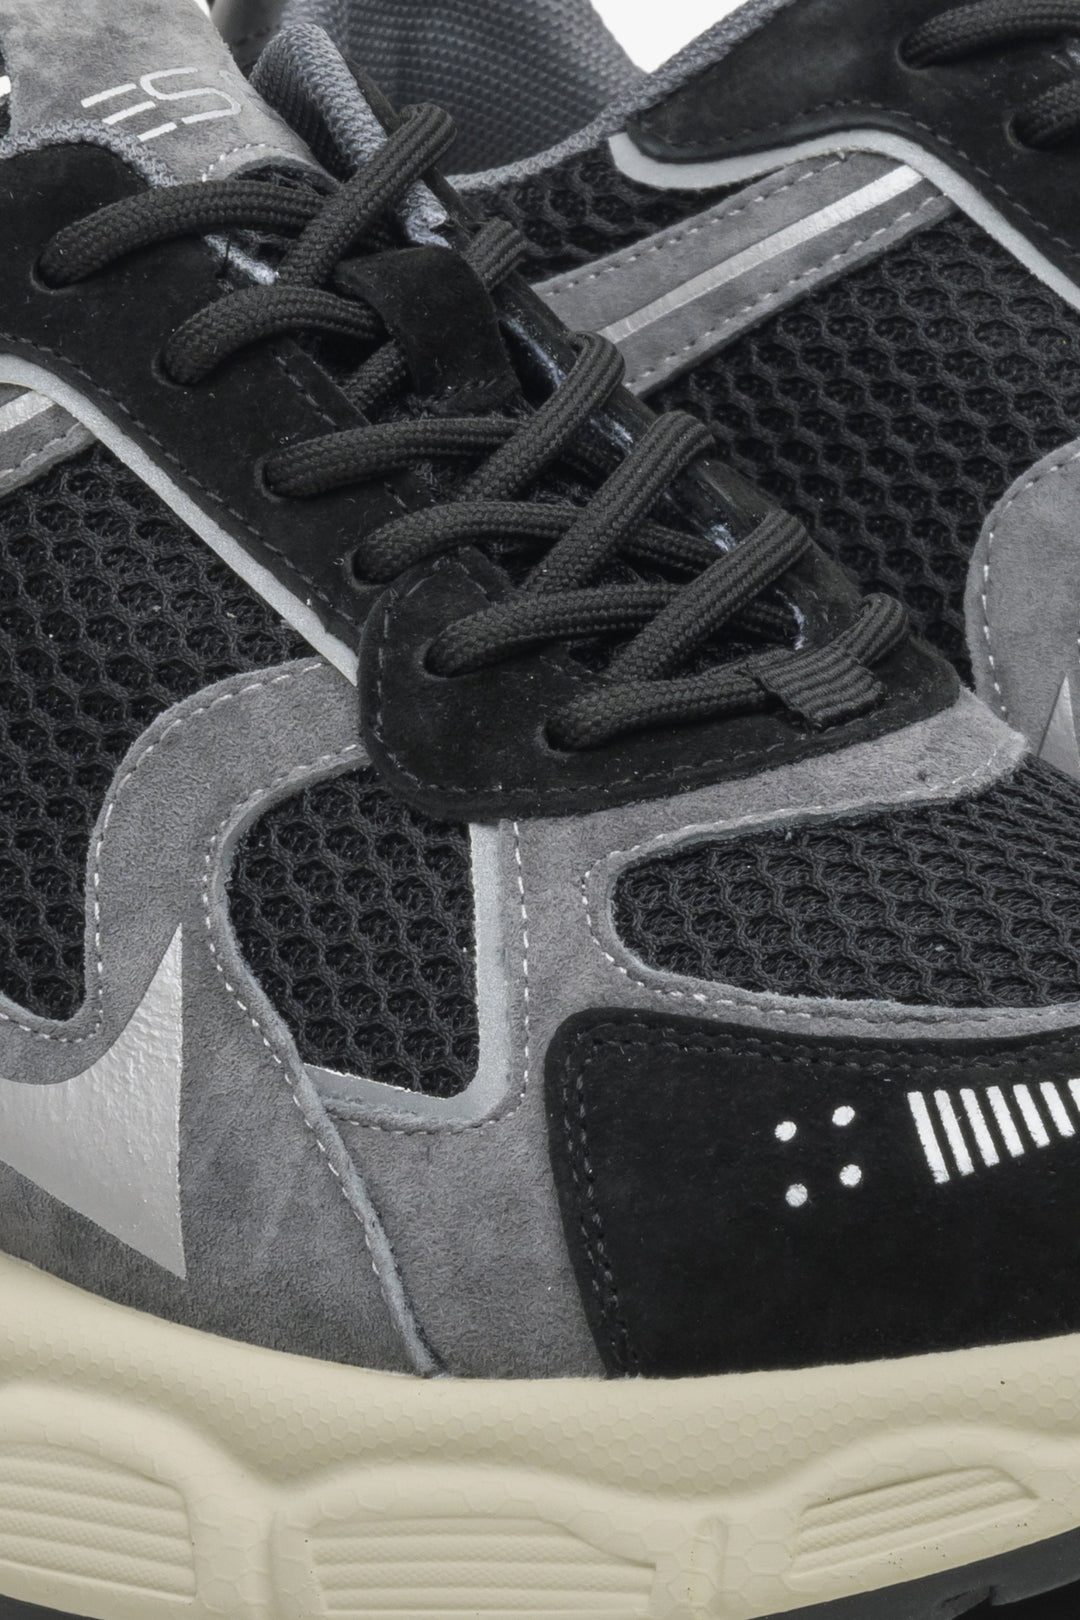 Women's black and grey sneakers ES 8 - close-up on details.